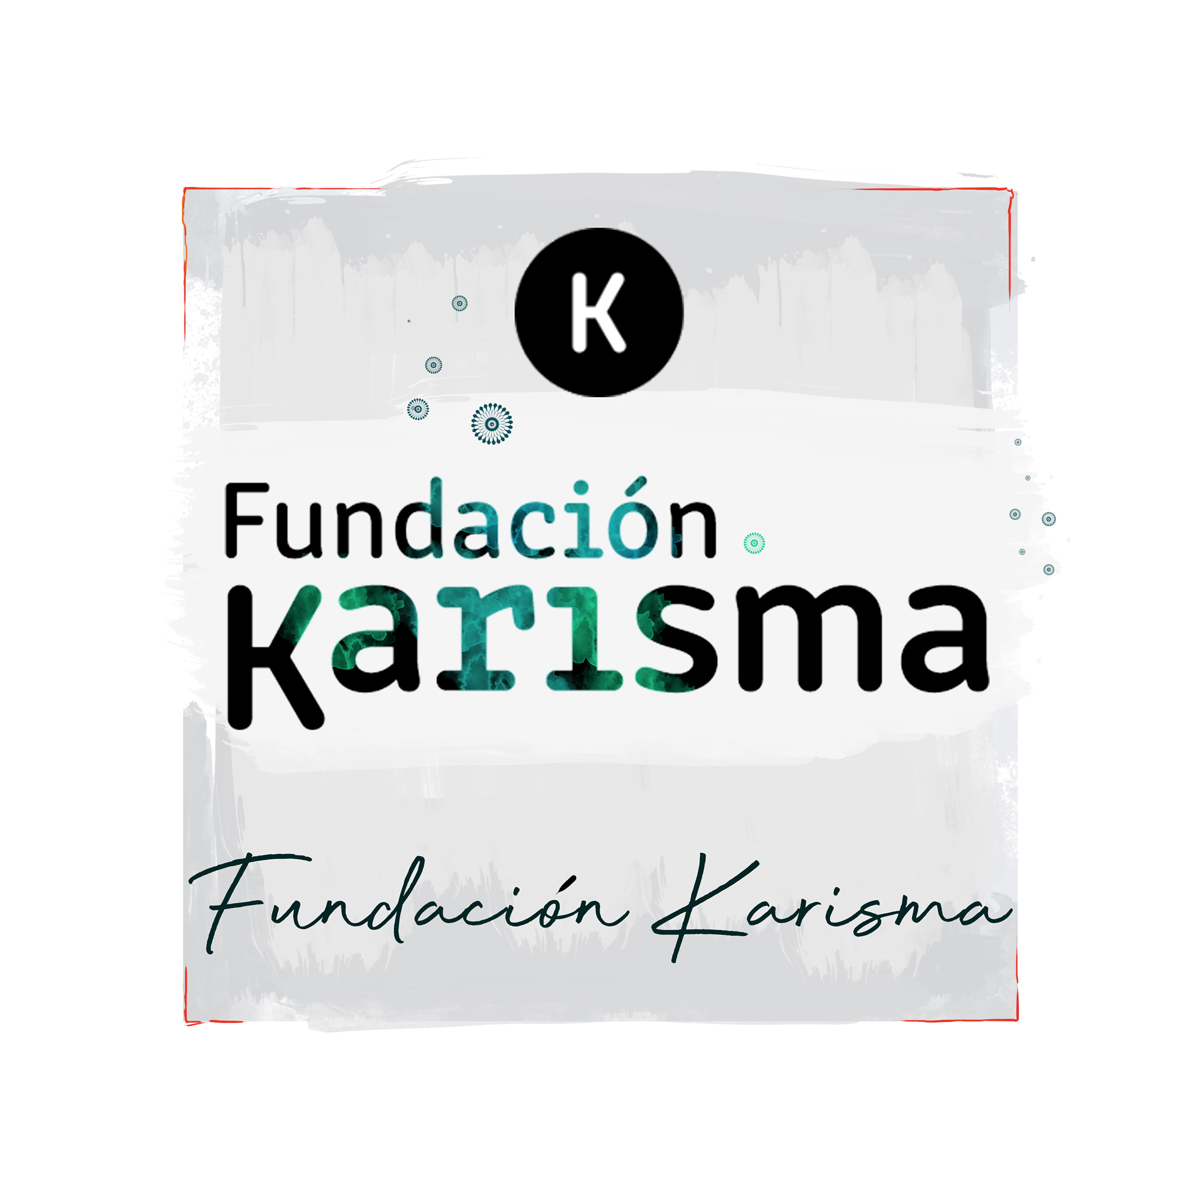 Fundación Karisma: “At the heart of Karisma’s work has always been the promotion of access to knowledge and culture”